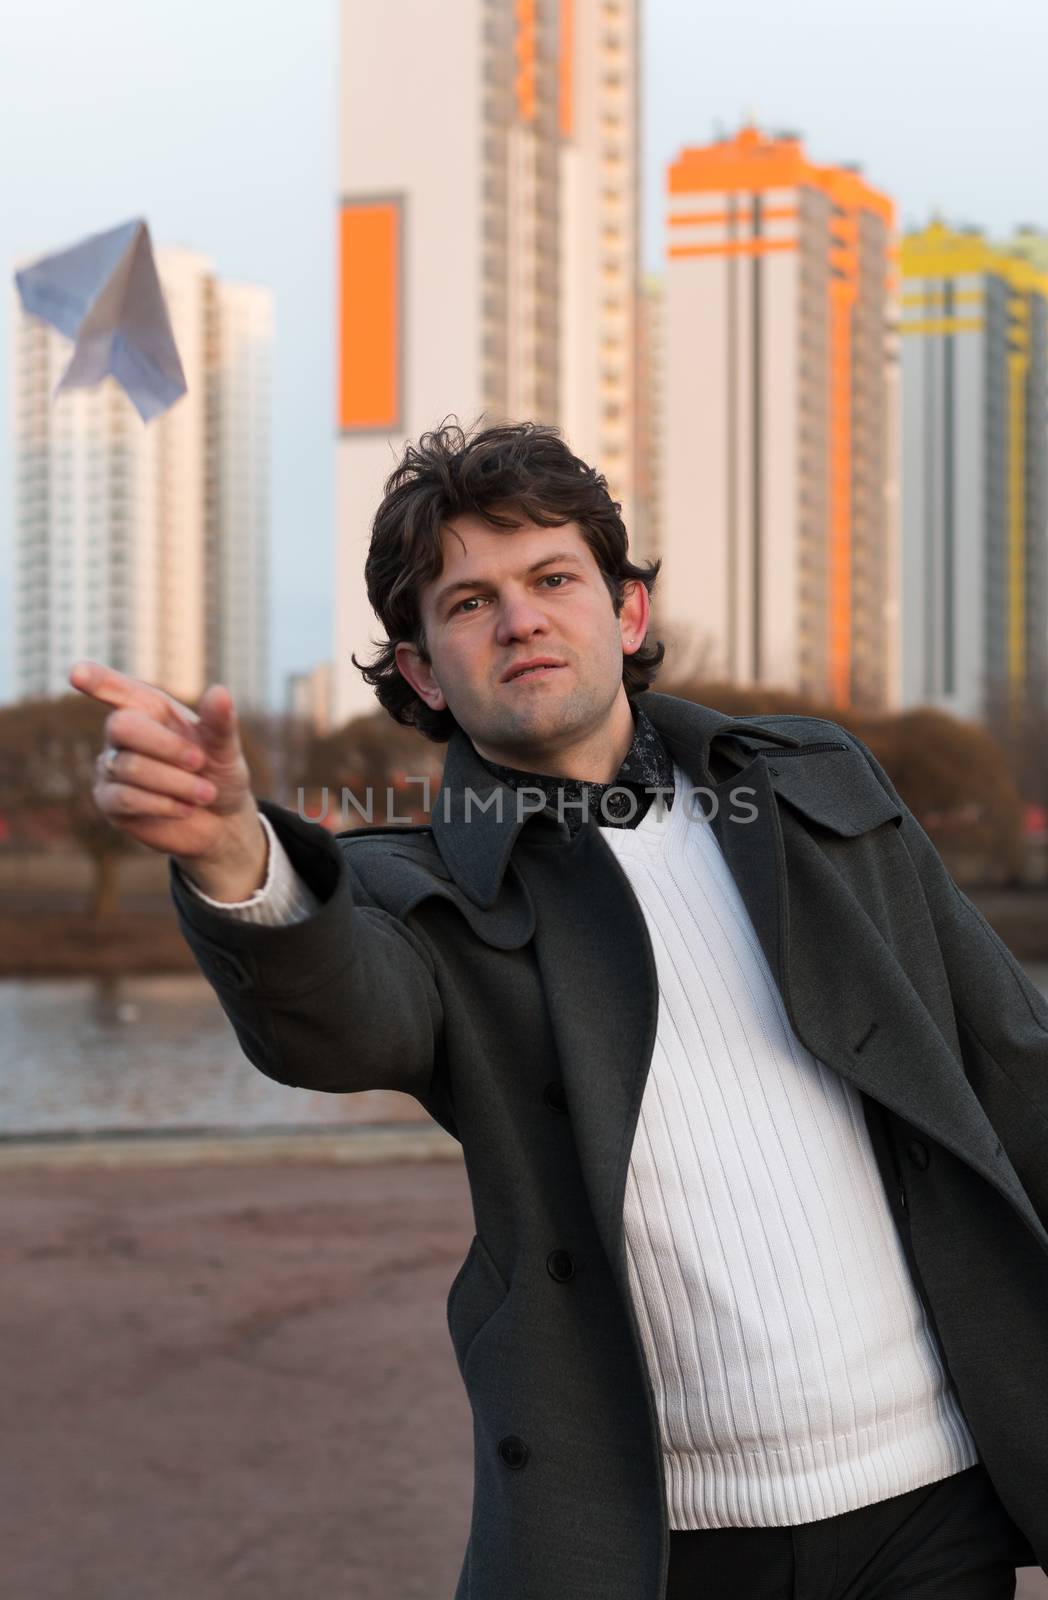 Paper airplane launching in park, free space, Man in grey coat and white sweater holding handmade paper airplane in hand on high-rise building background. Open-air game, rest, leisure, pastime concept.